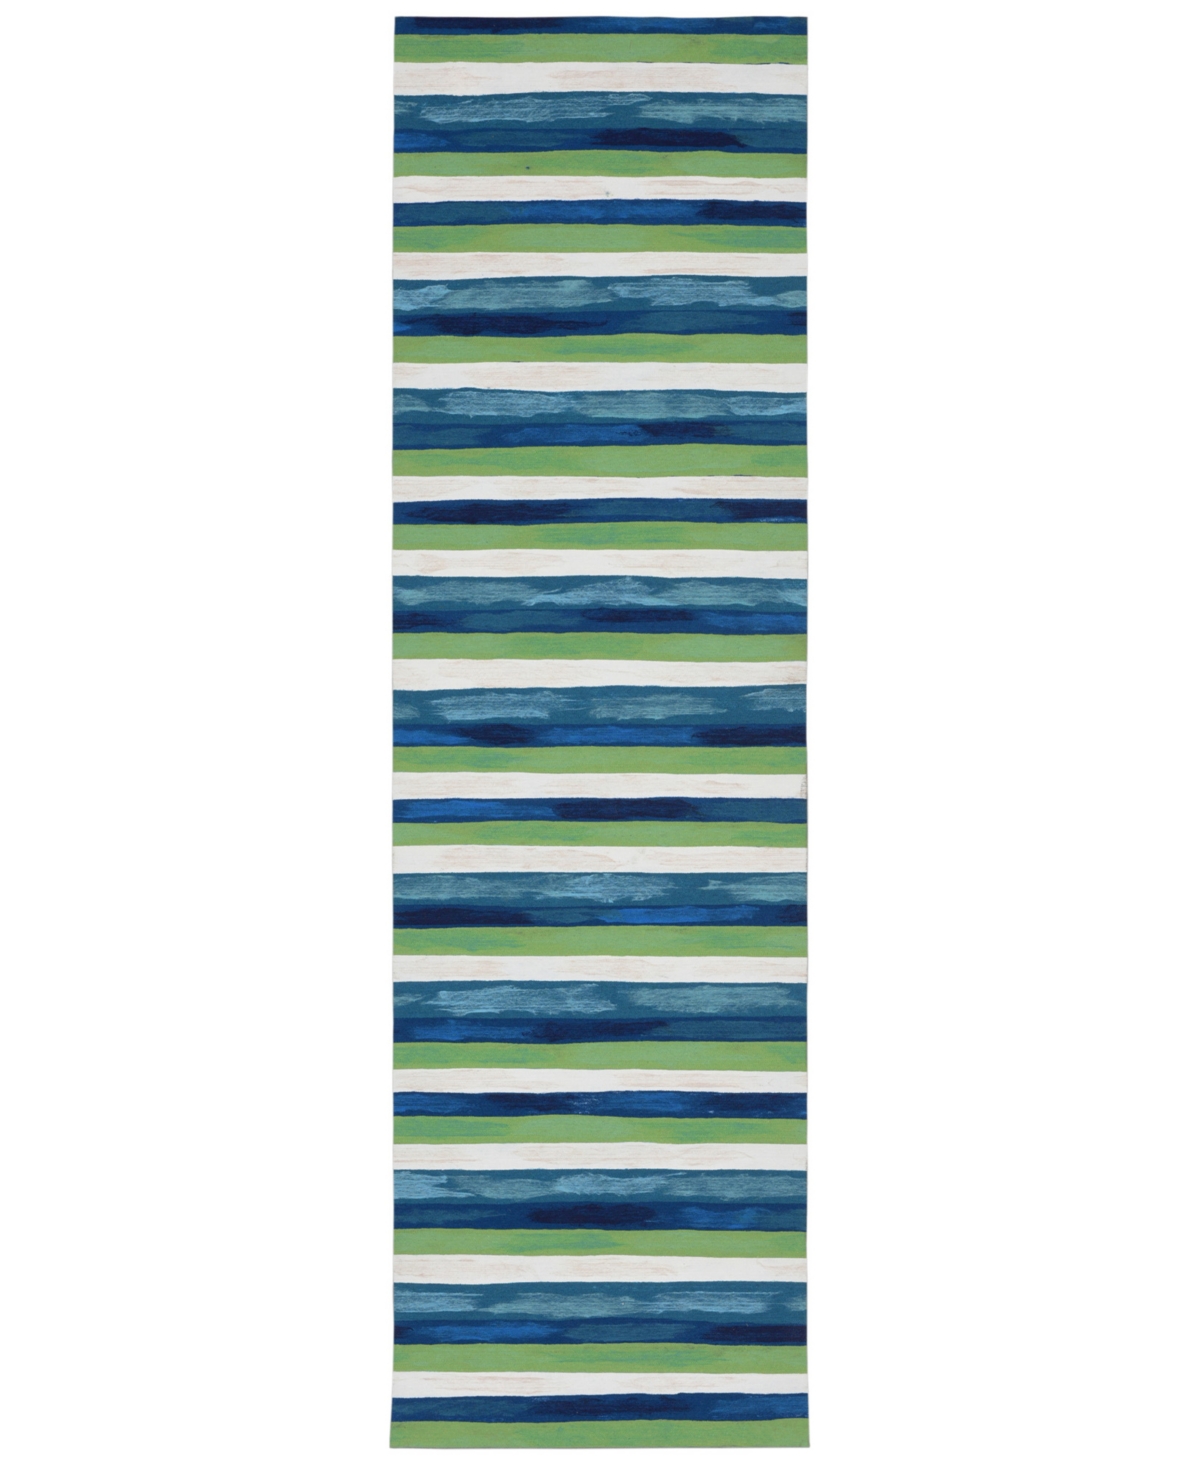 LIORA MANNE VISIONS II PAINTED STRIPES 2'3" X 8' RUNNER OUTDOOR AREA RUG